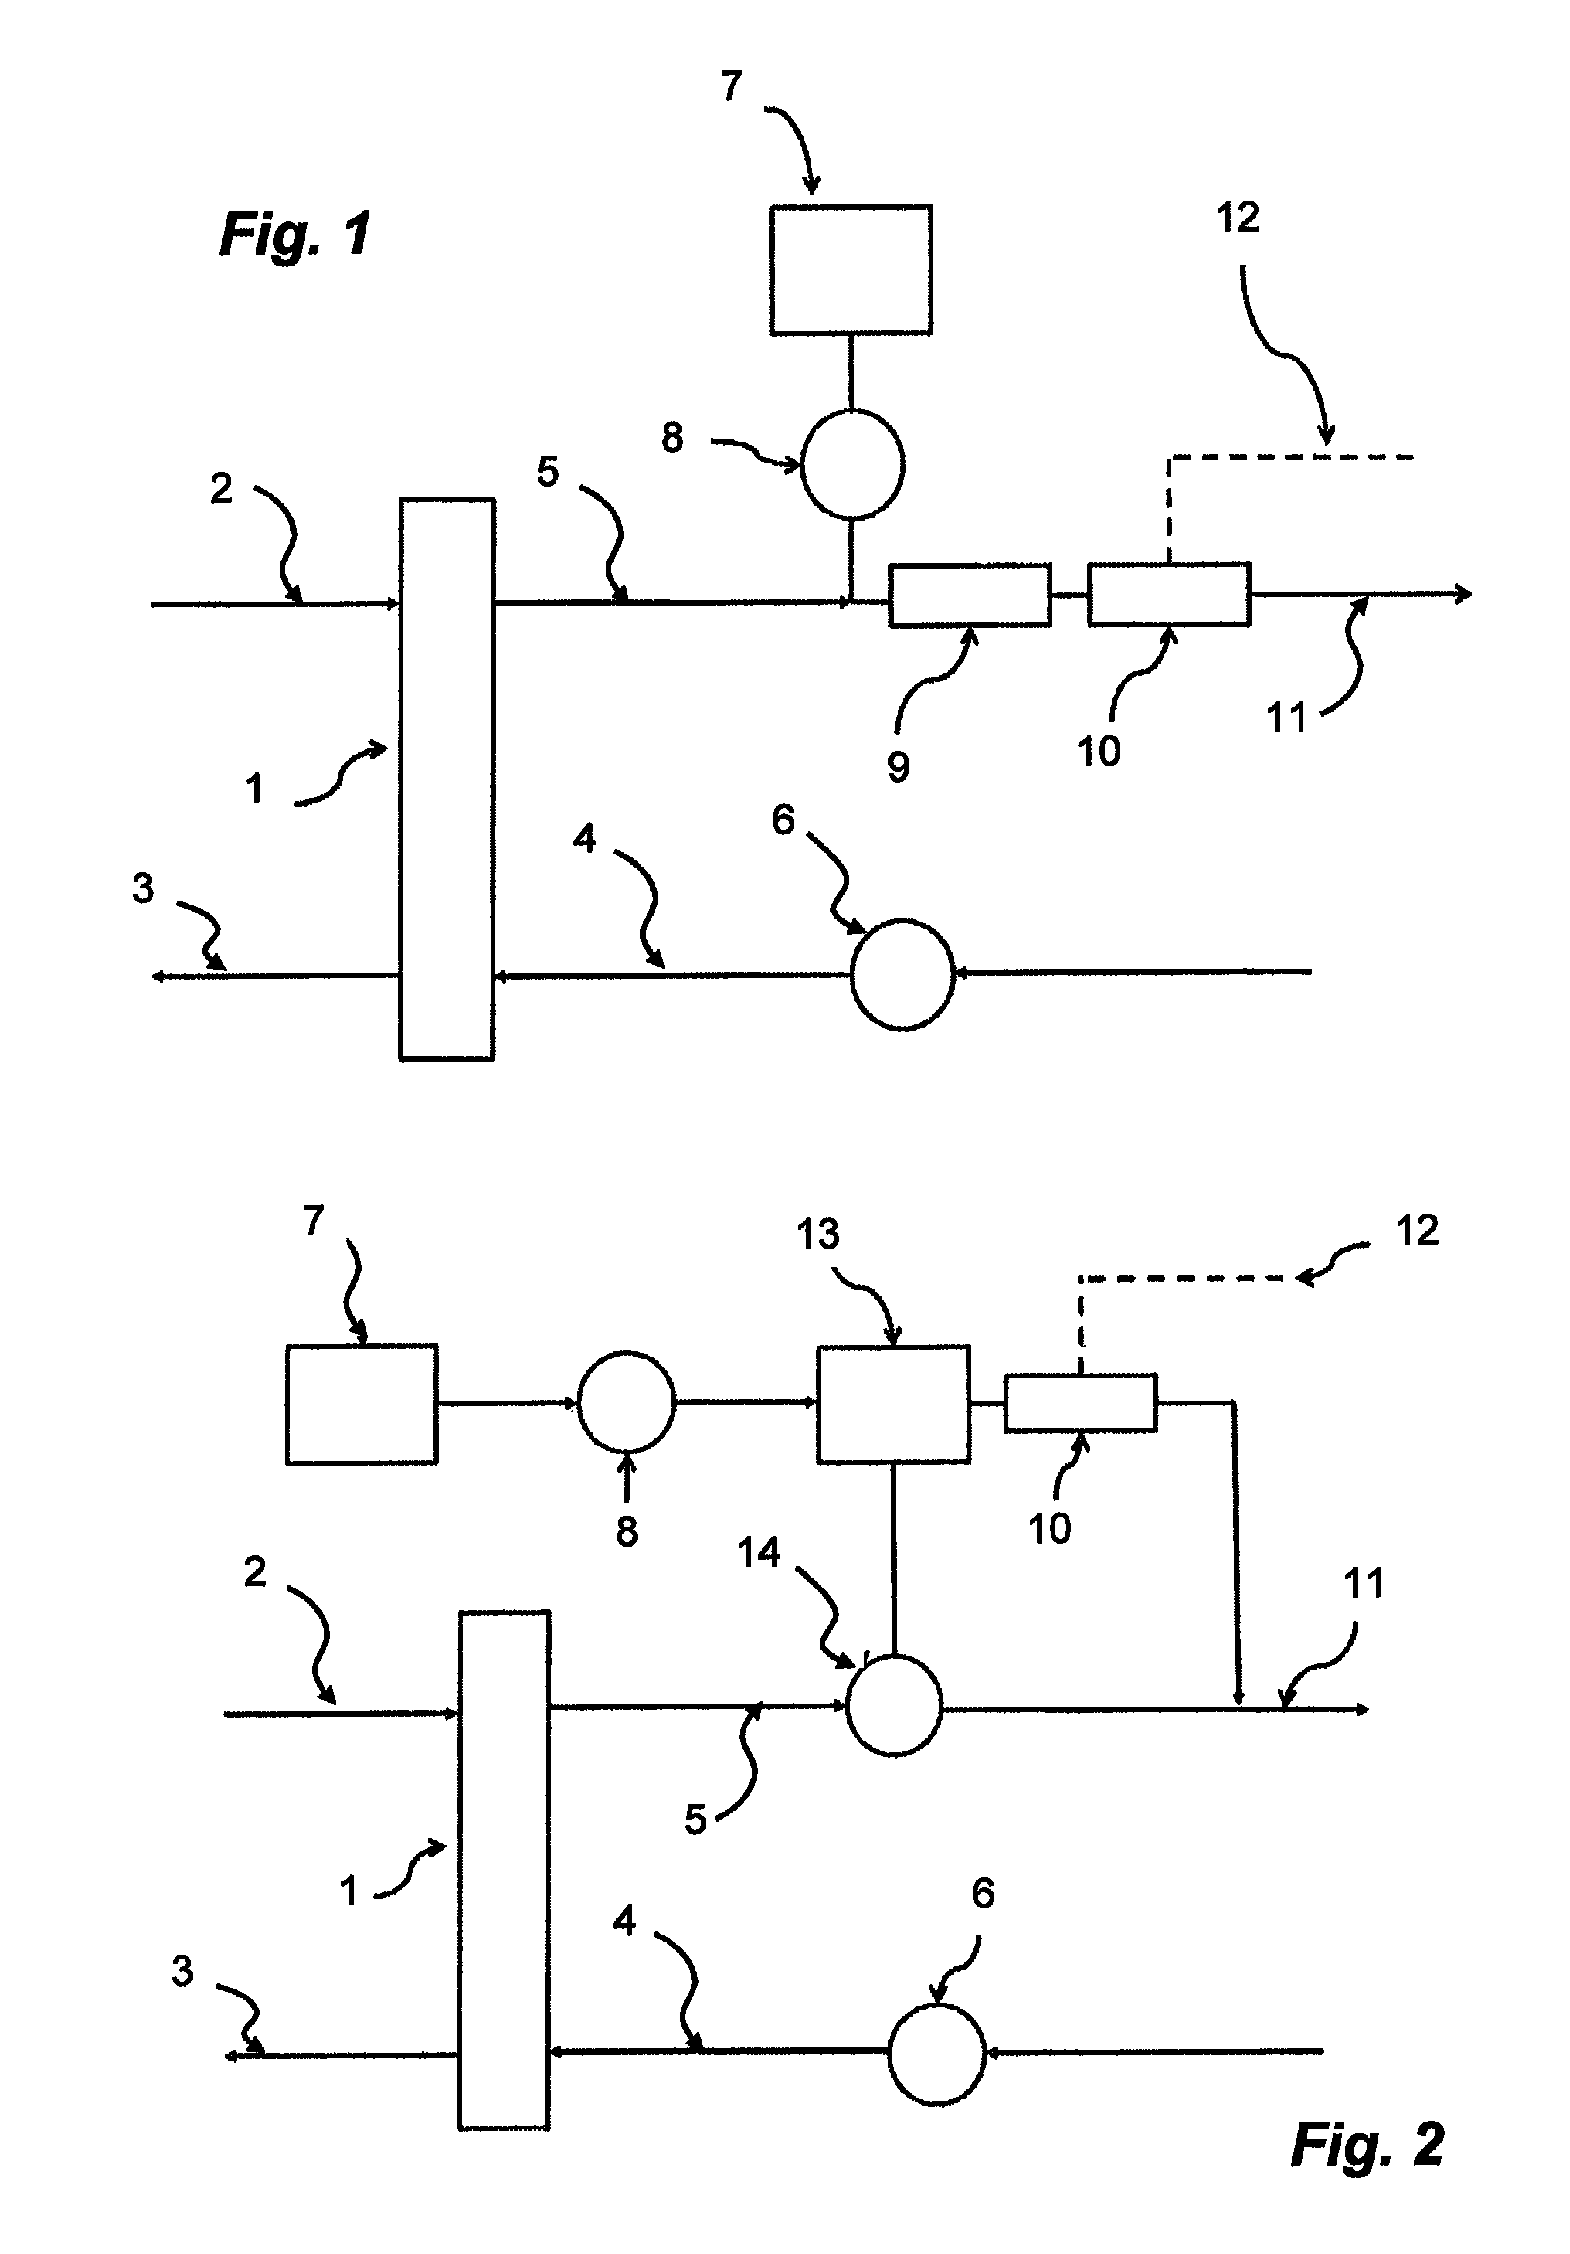 Apparatus and apparatus control method for the quantitative concentration determination of selected substances filtered out of a patient's body in a fluid